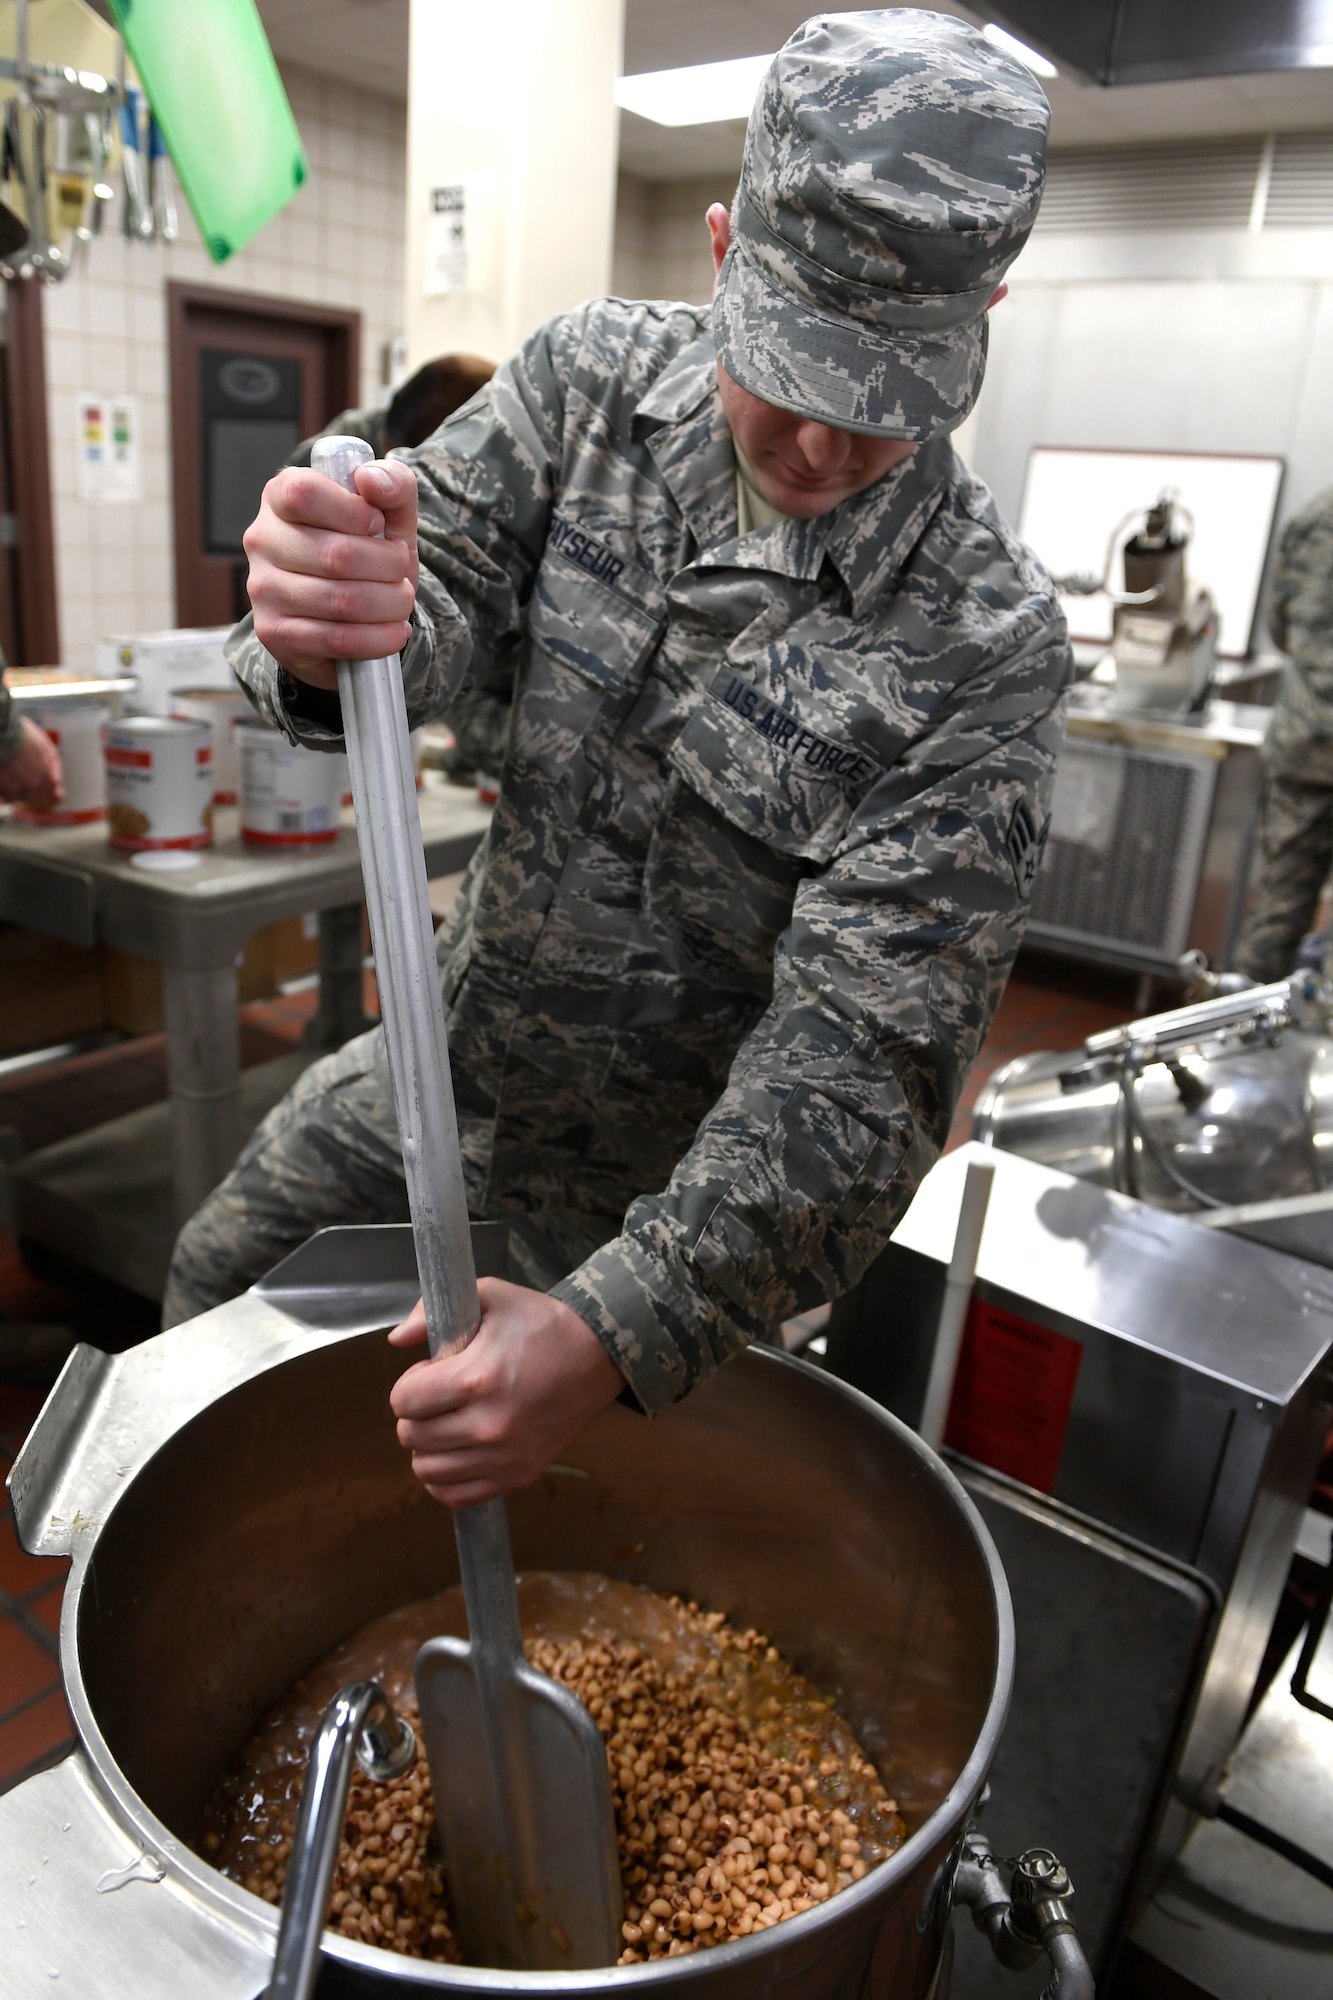 U.S. Air Force Senior Airman Paul Payseur, 145th Force Support Squadron, prepares black eye peas for lunch in the dining facility during drill weekend at the North Carolina Air National Guard Base, Charlotte Douglas International Airport, Jan. 12, 2019. Food services Airmen from the North Carolina Air National Guard train members from the Niagara Falls Air Reserve Station, New York, on full-service kitchen operations in preparation for the upcoming Air Force active duty and reserve Hennessy Award competition.